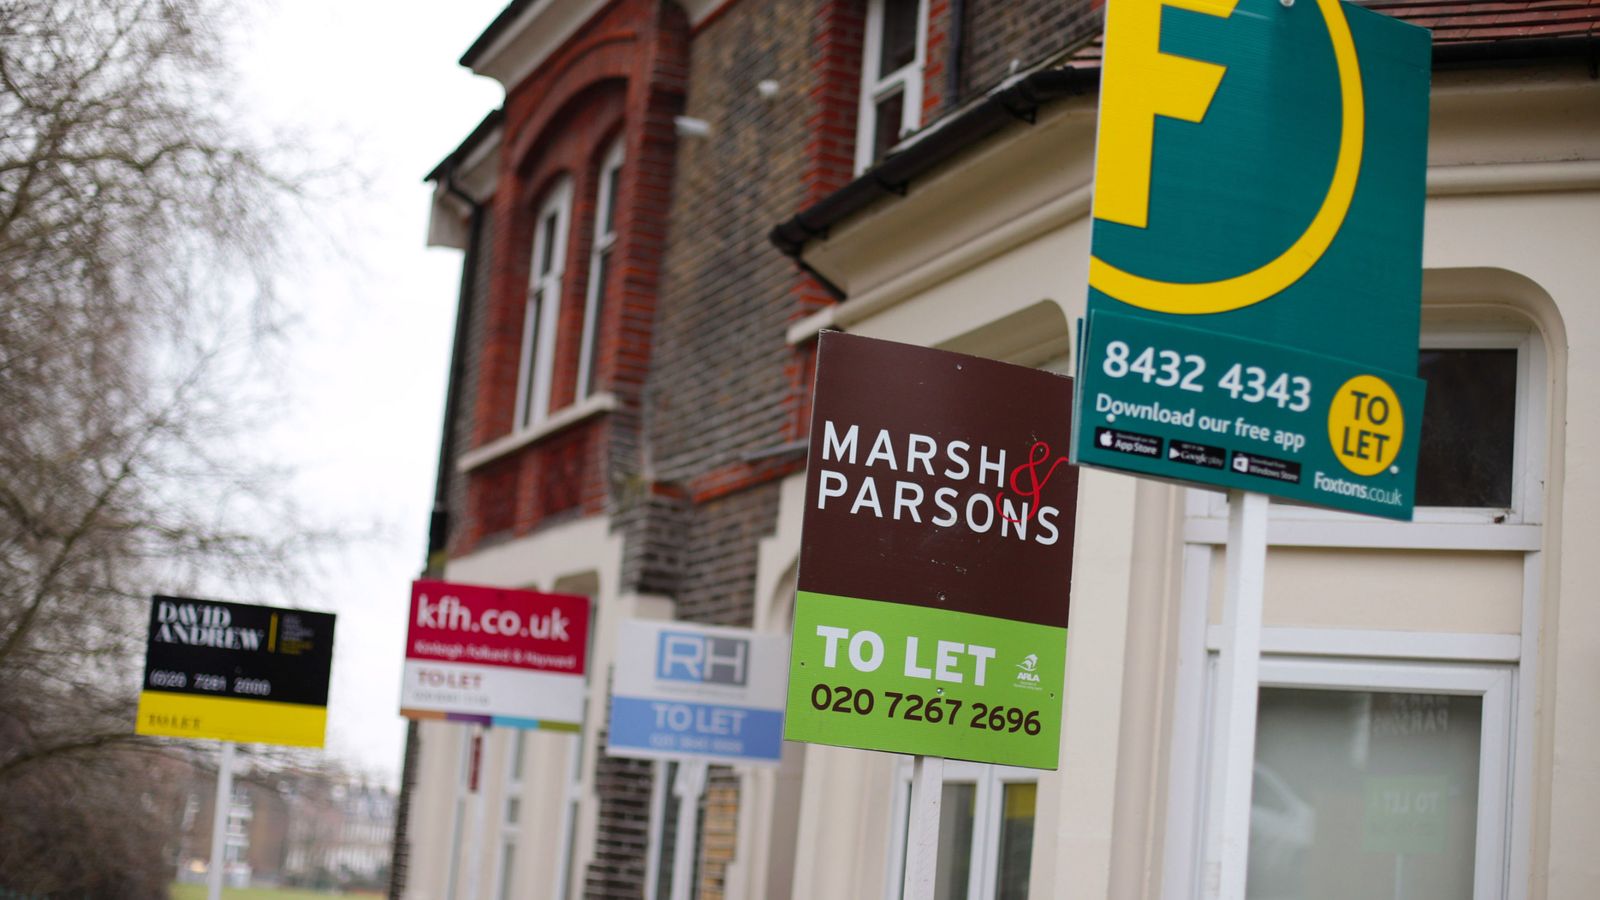 Nearly one million private renters in England under threat of eviction, new research finds